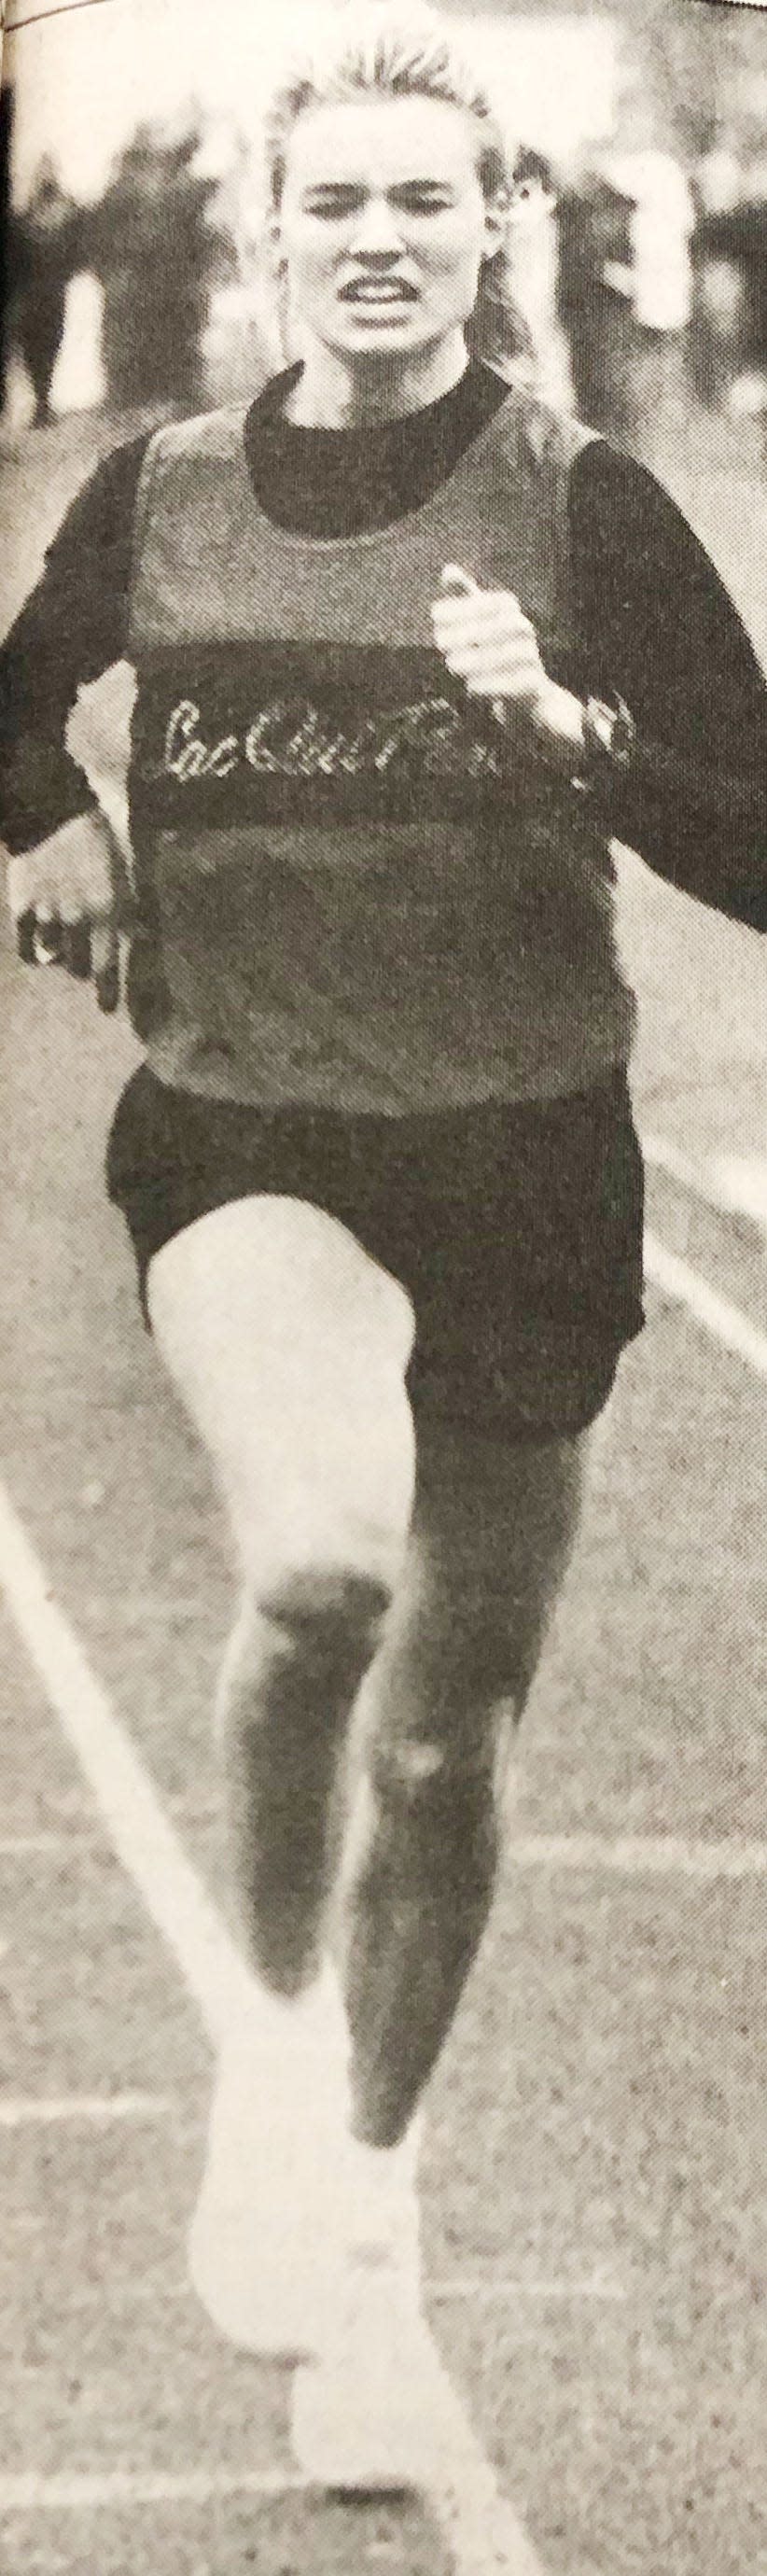 Dawson (Minn.) native Carrie Tollefson, shown competing in the 1995 Watoma Relays track and field, was a five-time Minnesota state Class A girls cross country champion and eventual U.S. Olympian.